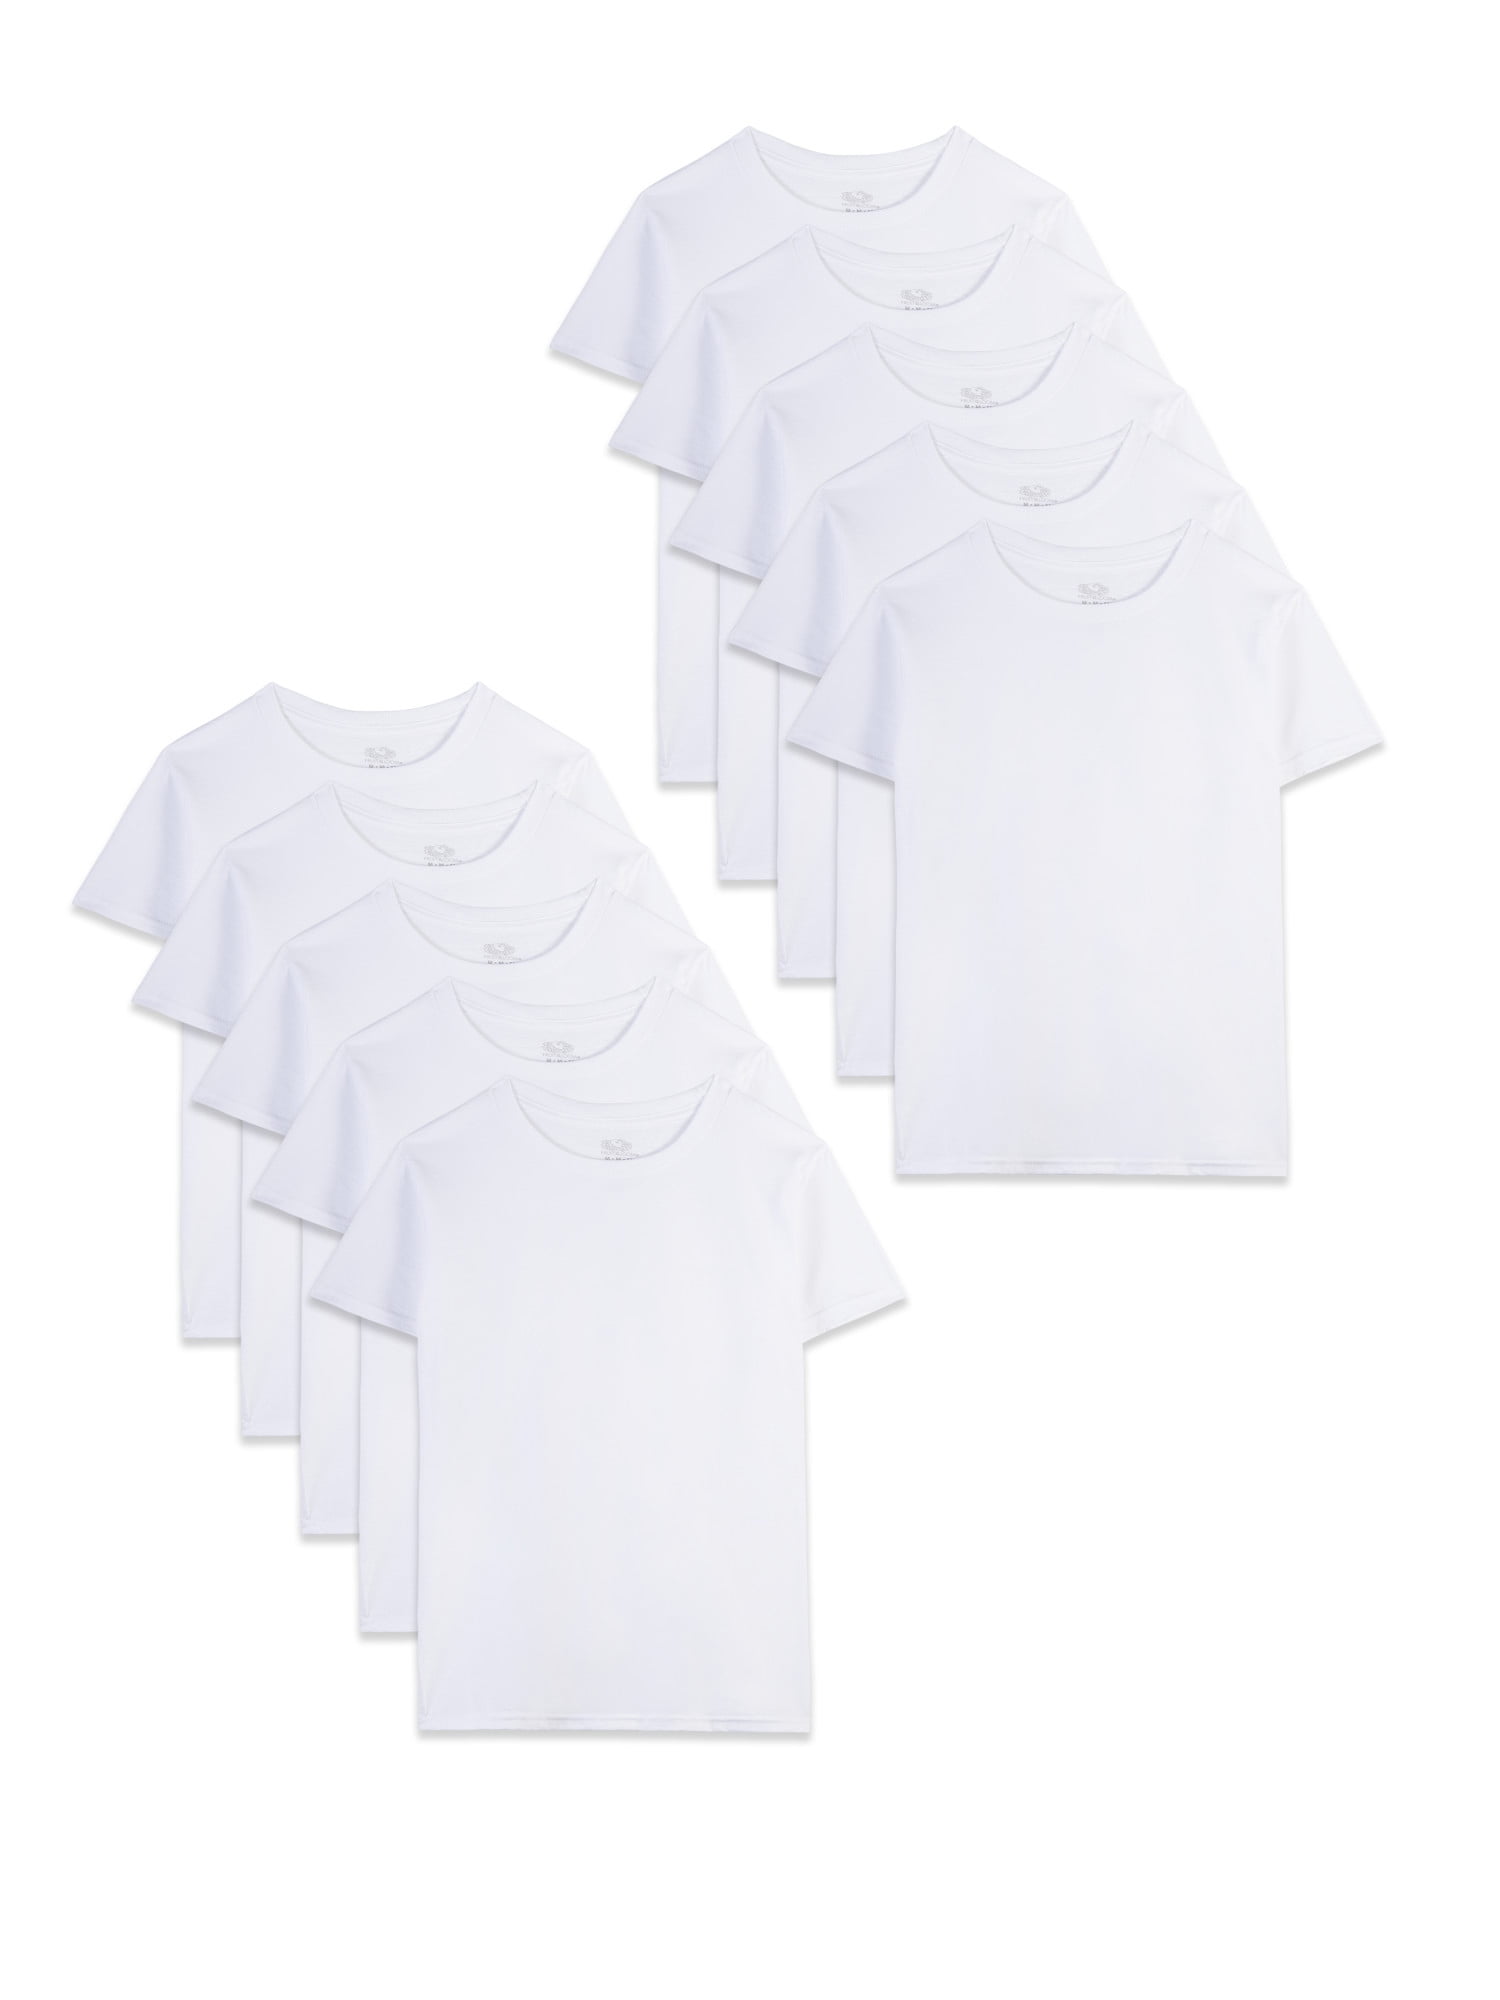 Fruit of the Loom Toddler Boys Undershirts White Crew T-Shirts, 10 Pack ...